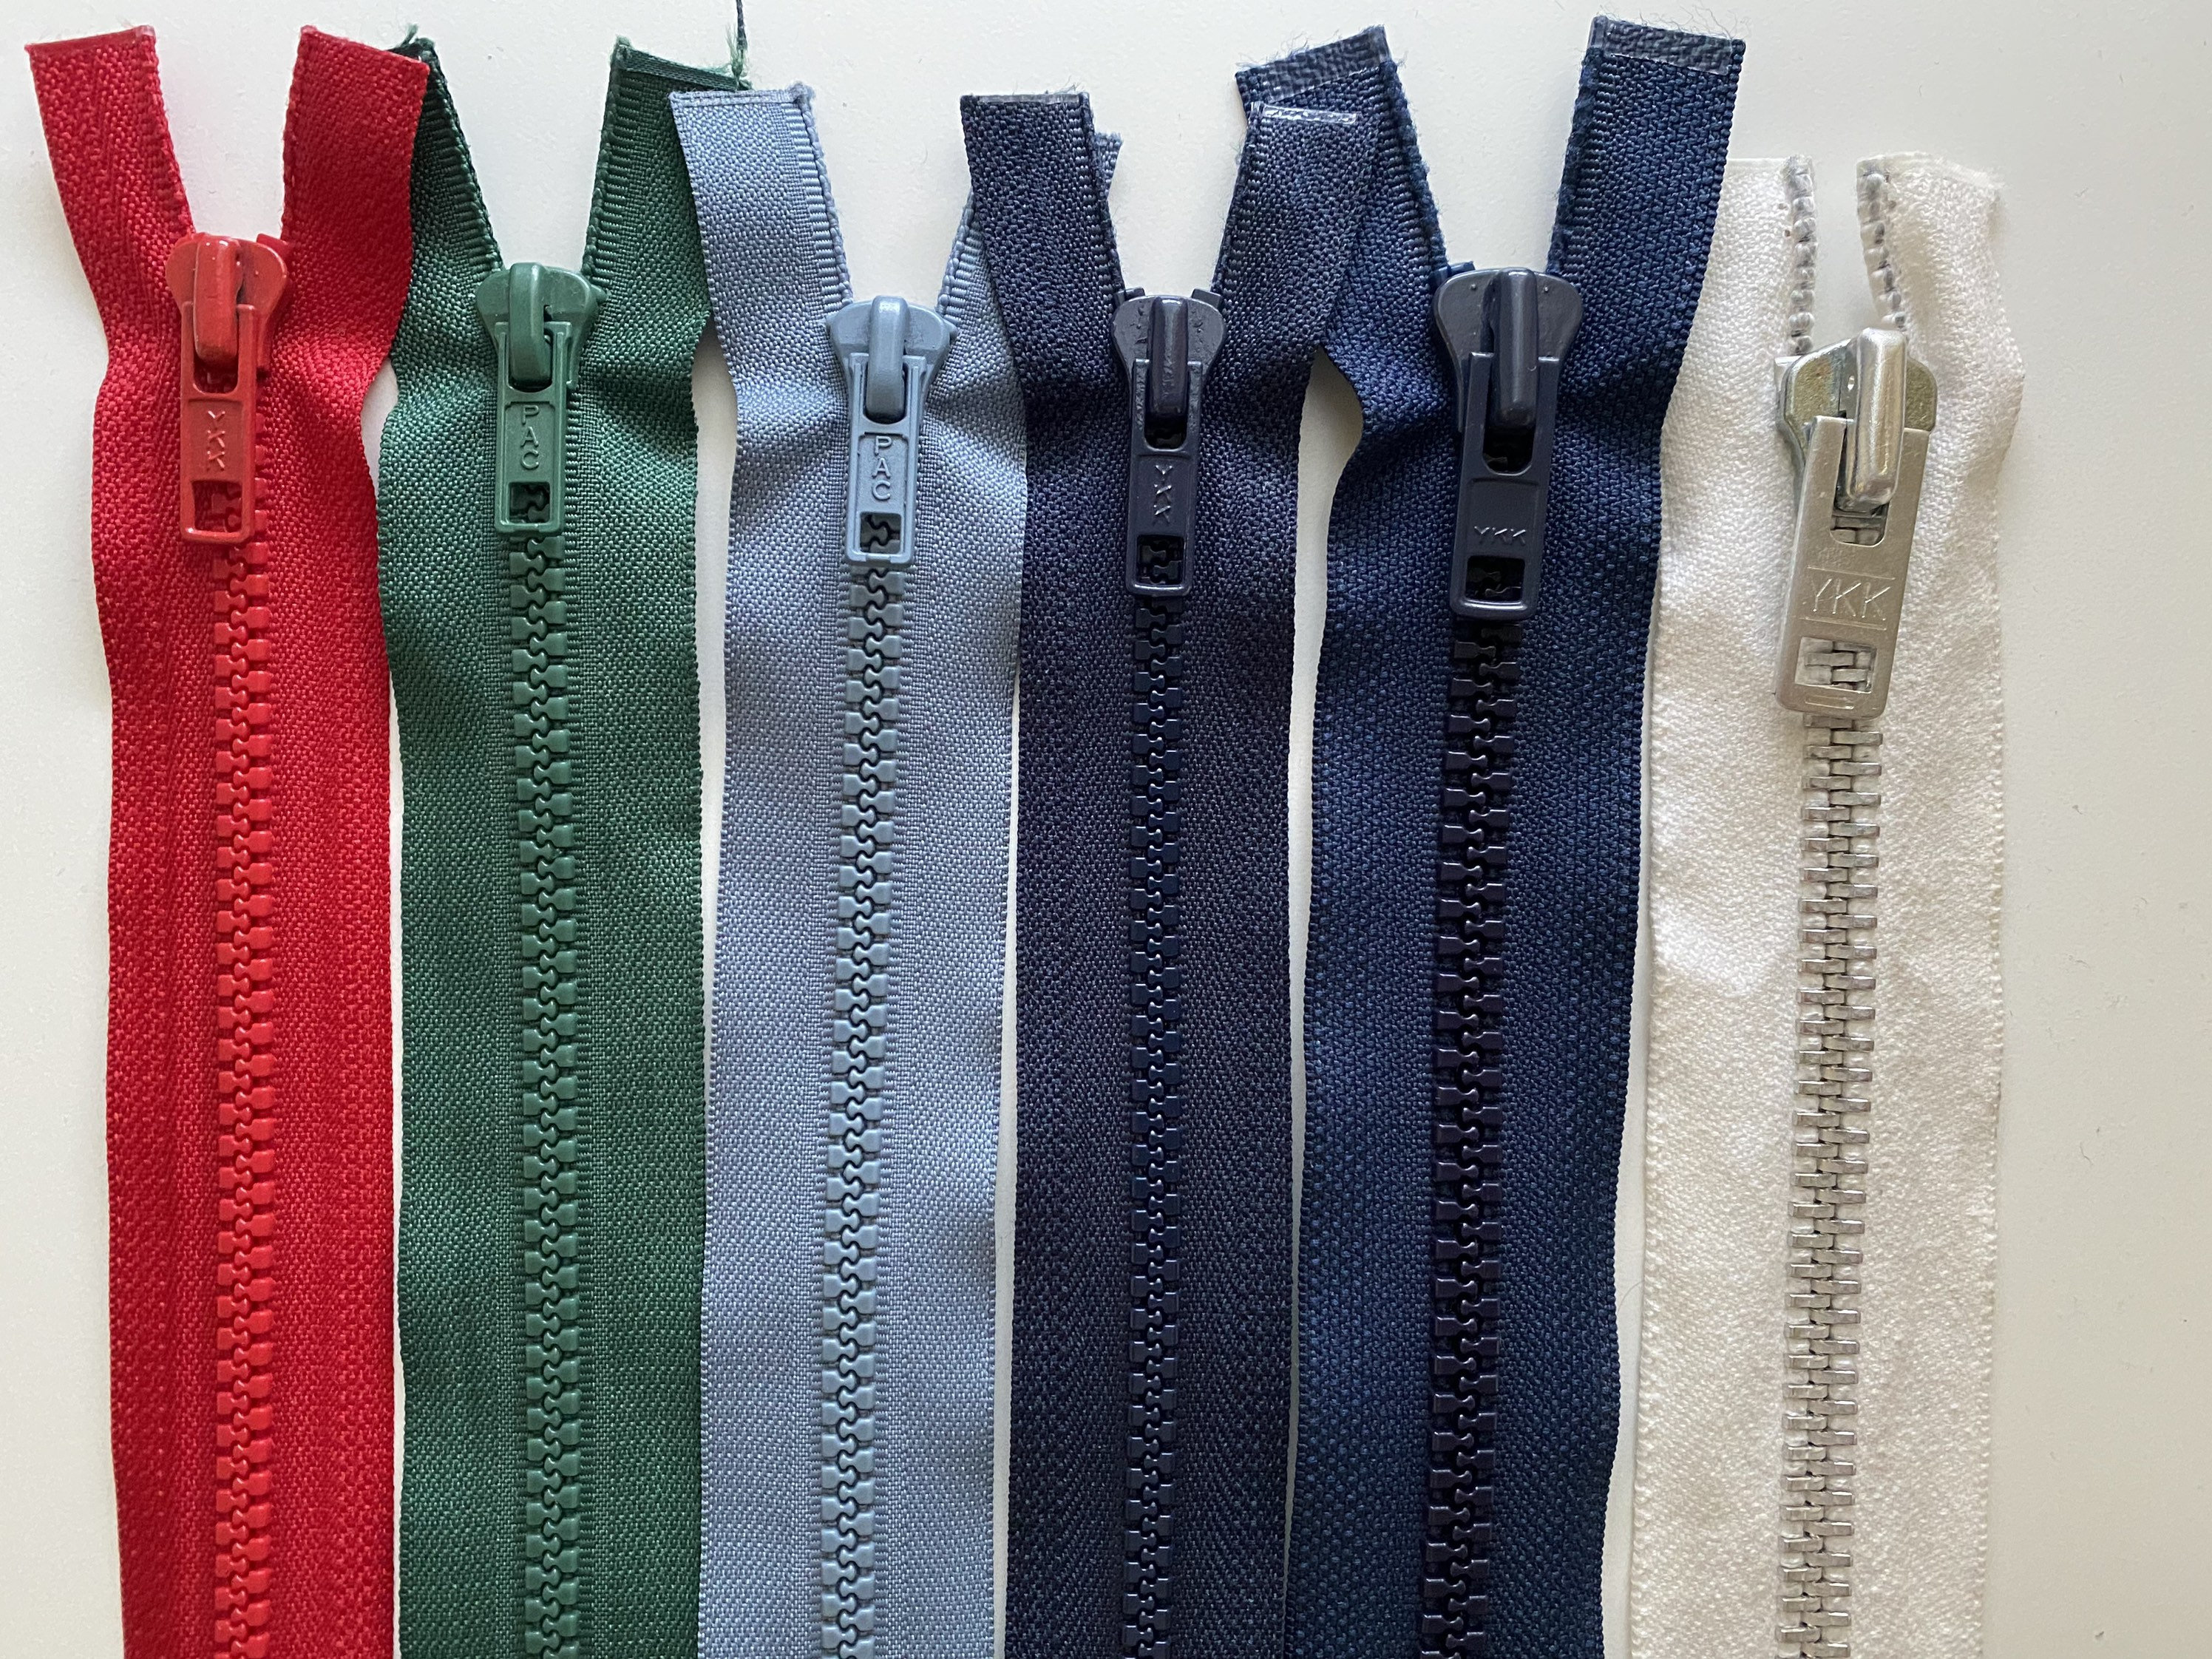 1pc Plastic Jacket Zipper 5mm Open-end Zipper 2 Sliders Length / Vislon  With Two Two-way Zippers Haberdashery 